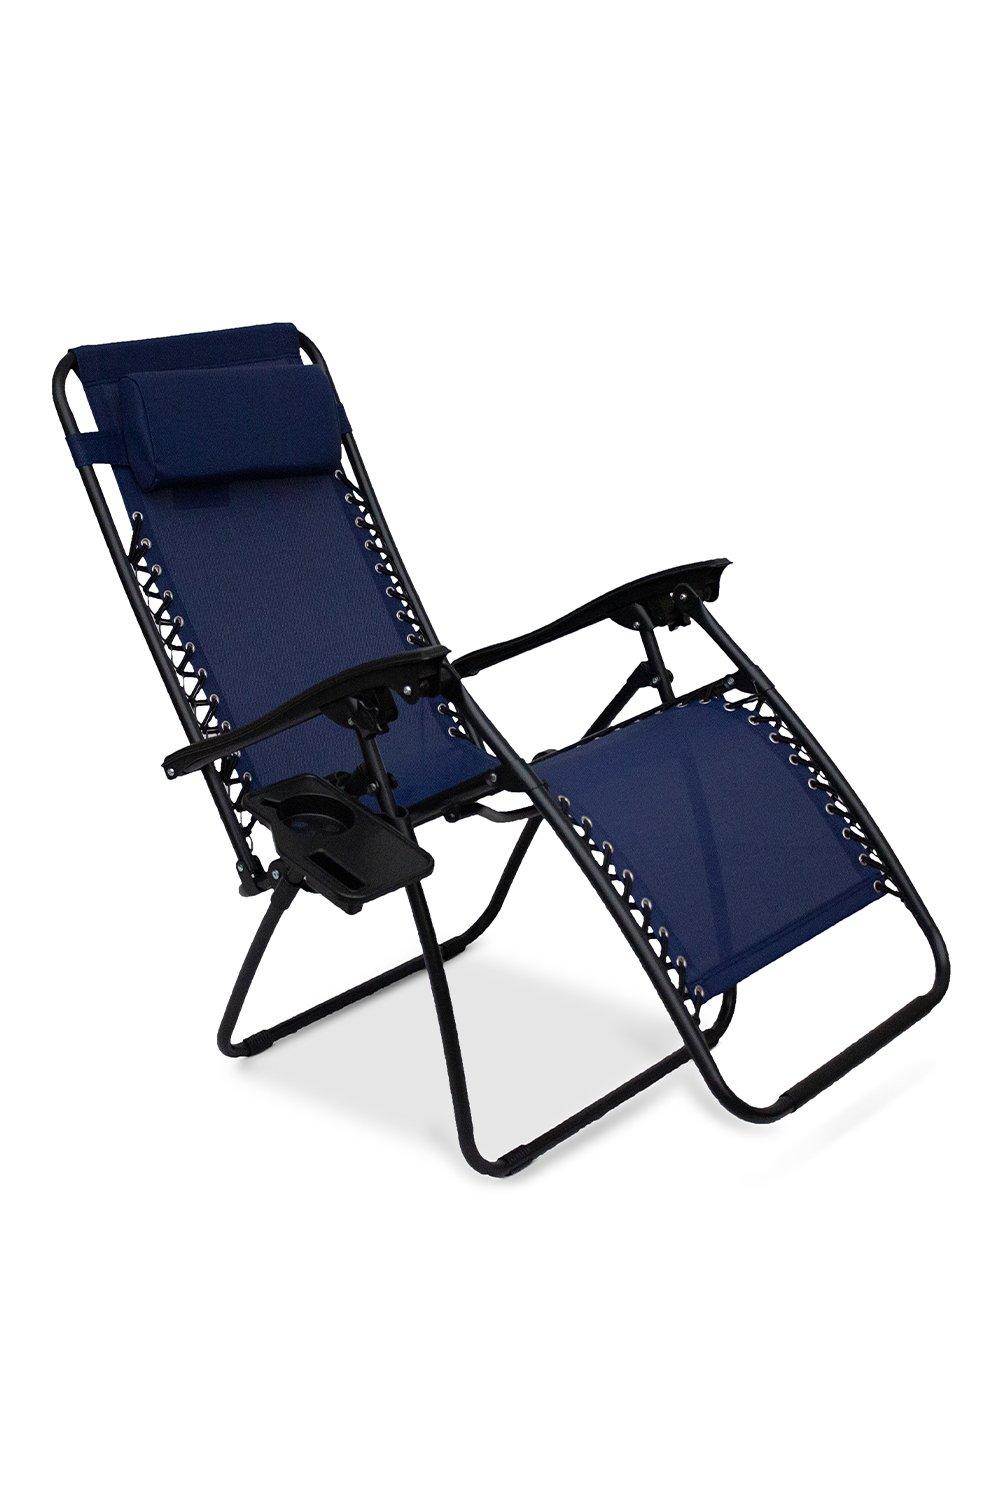 Zero Gravity Relaxer Chairs with Drink & Phone Holders - Pack of 2